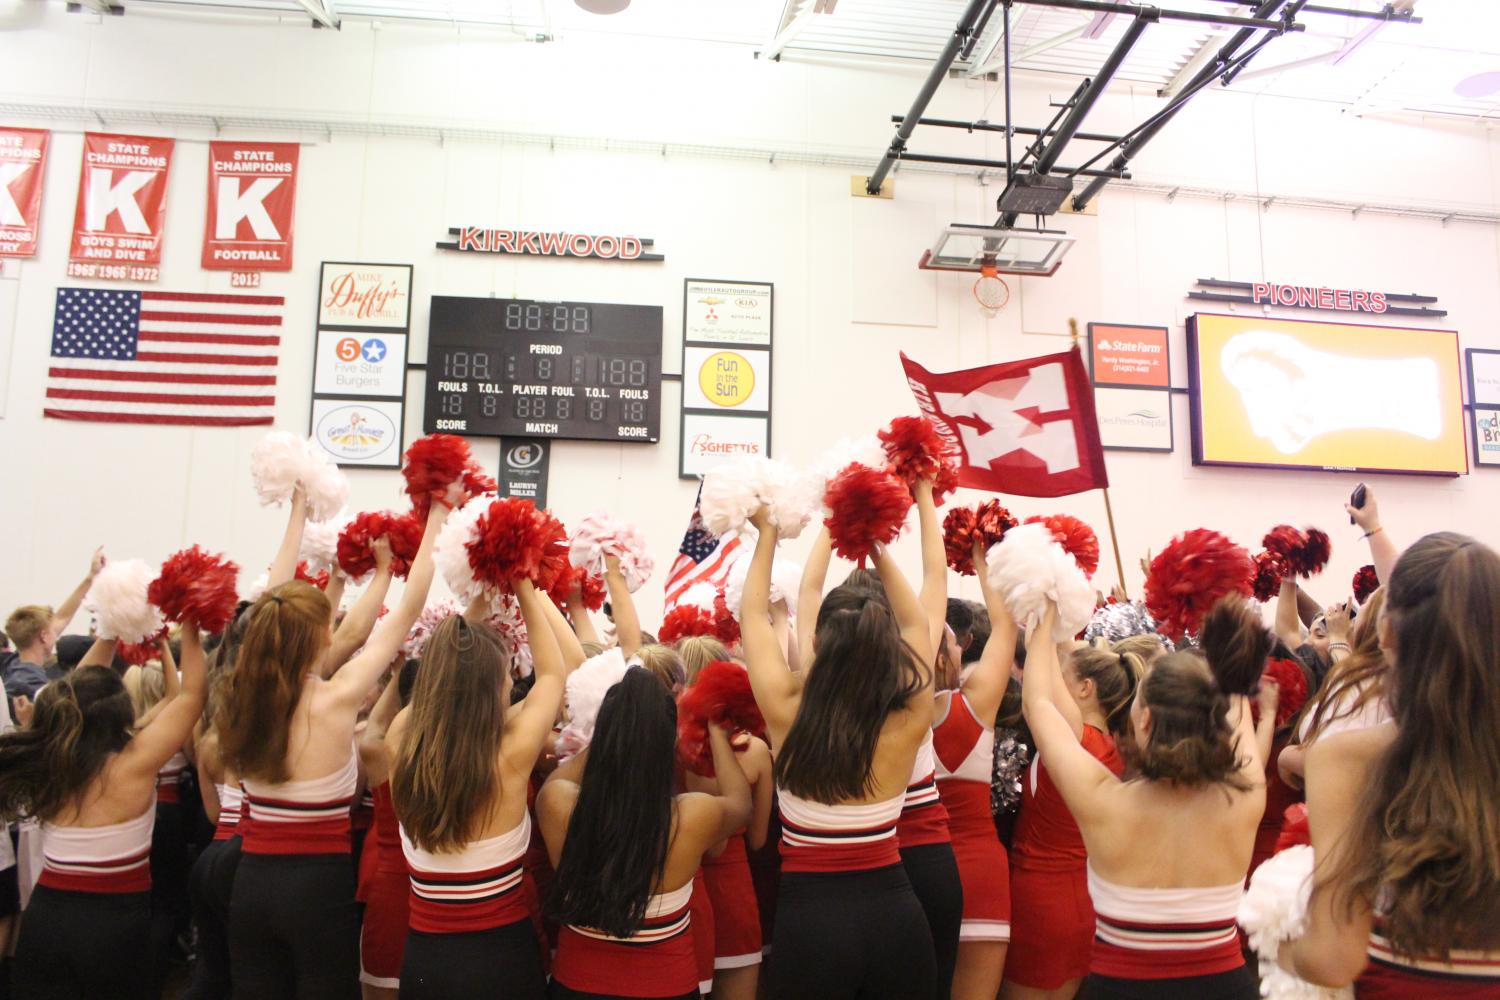 At the end of the pep rally, the KHS community comes together as a school.